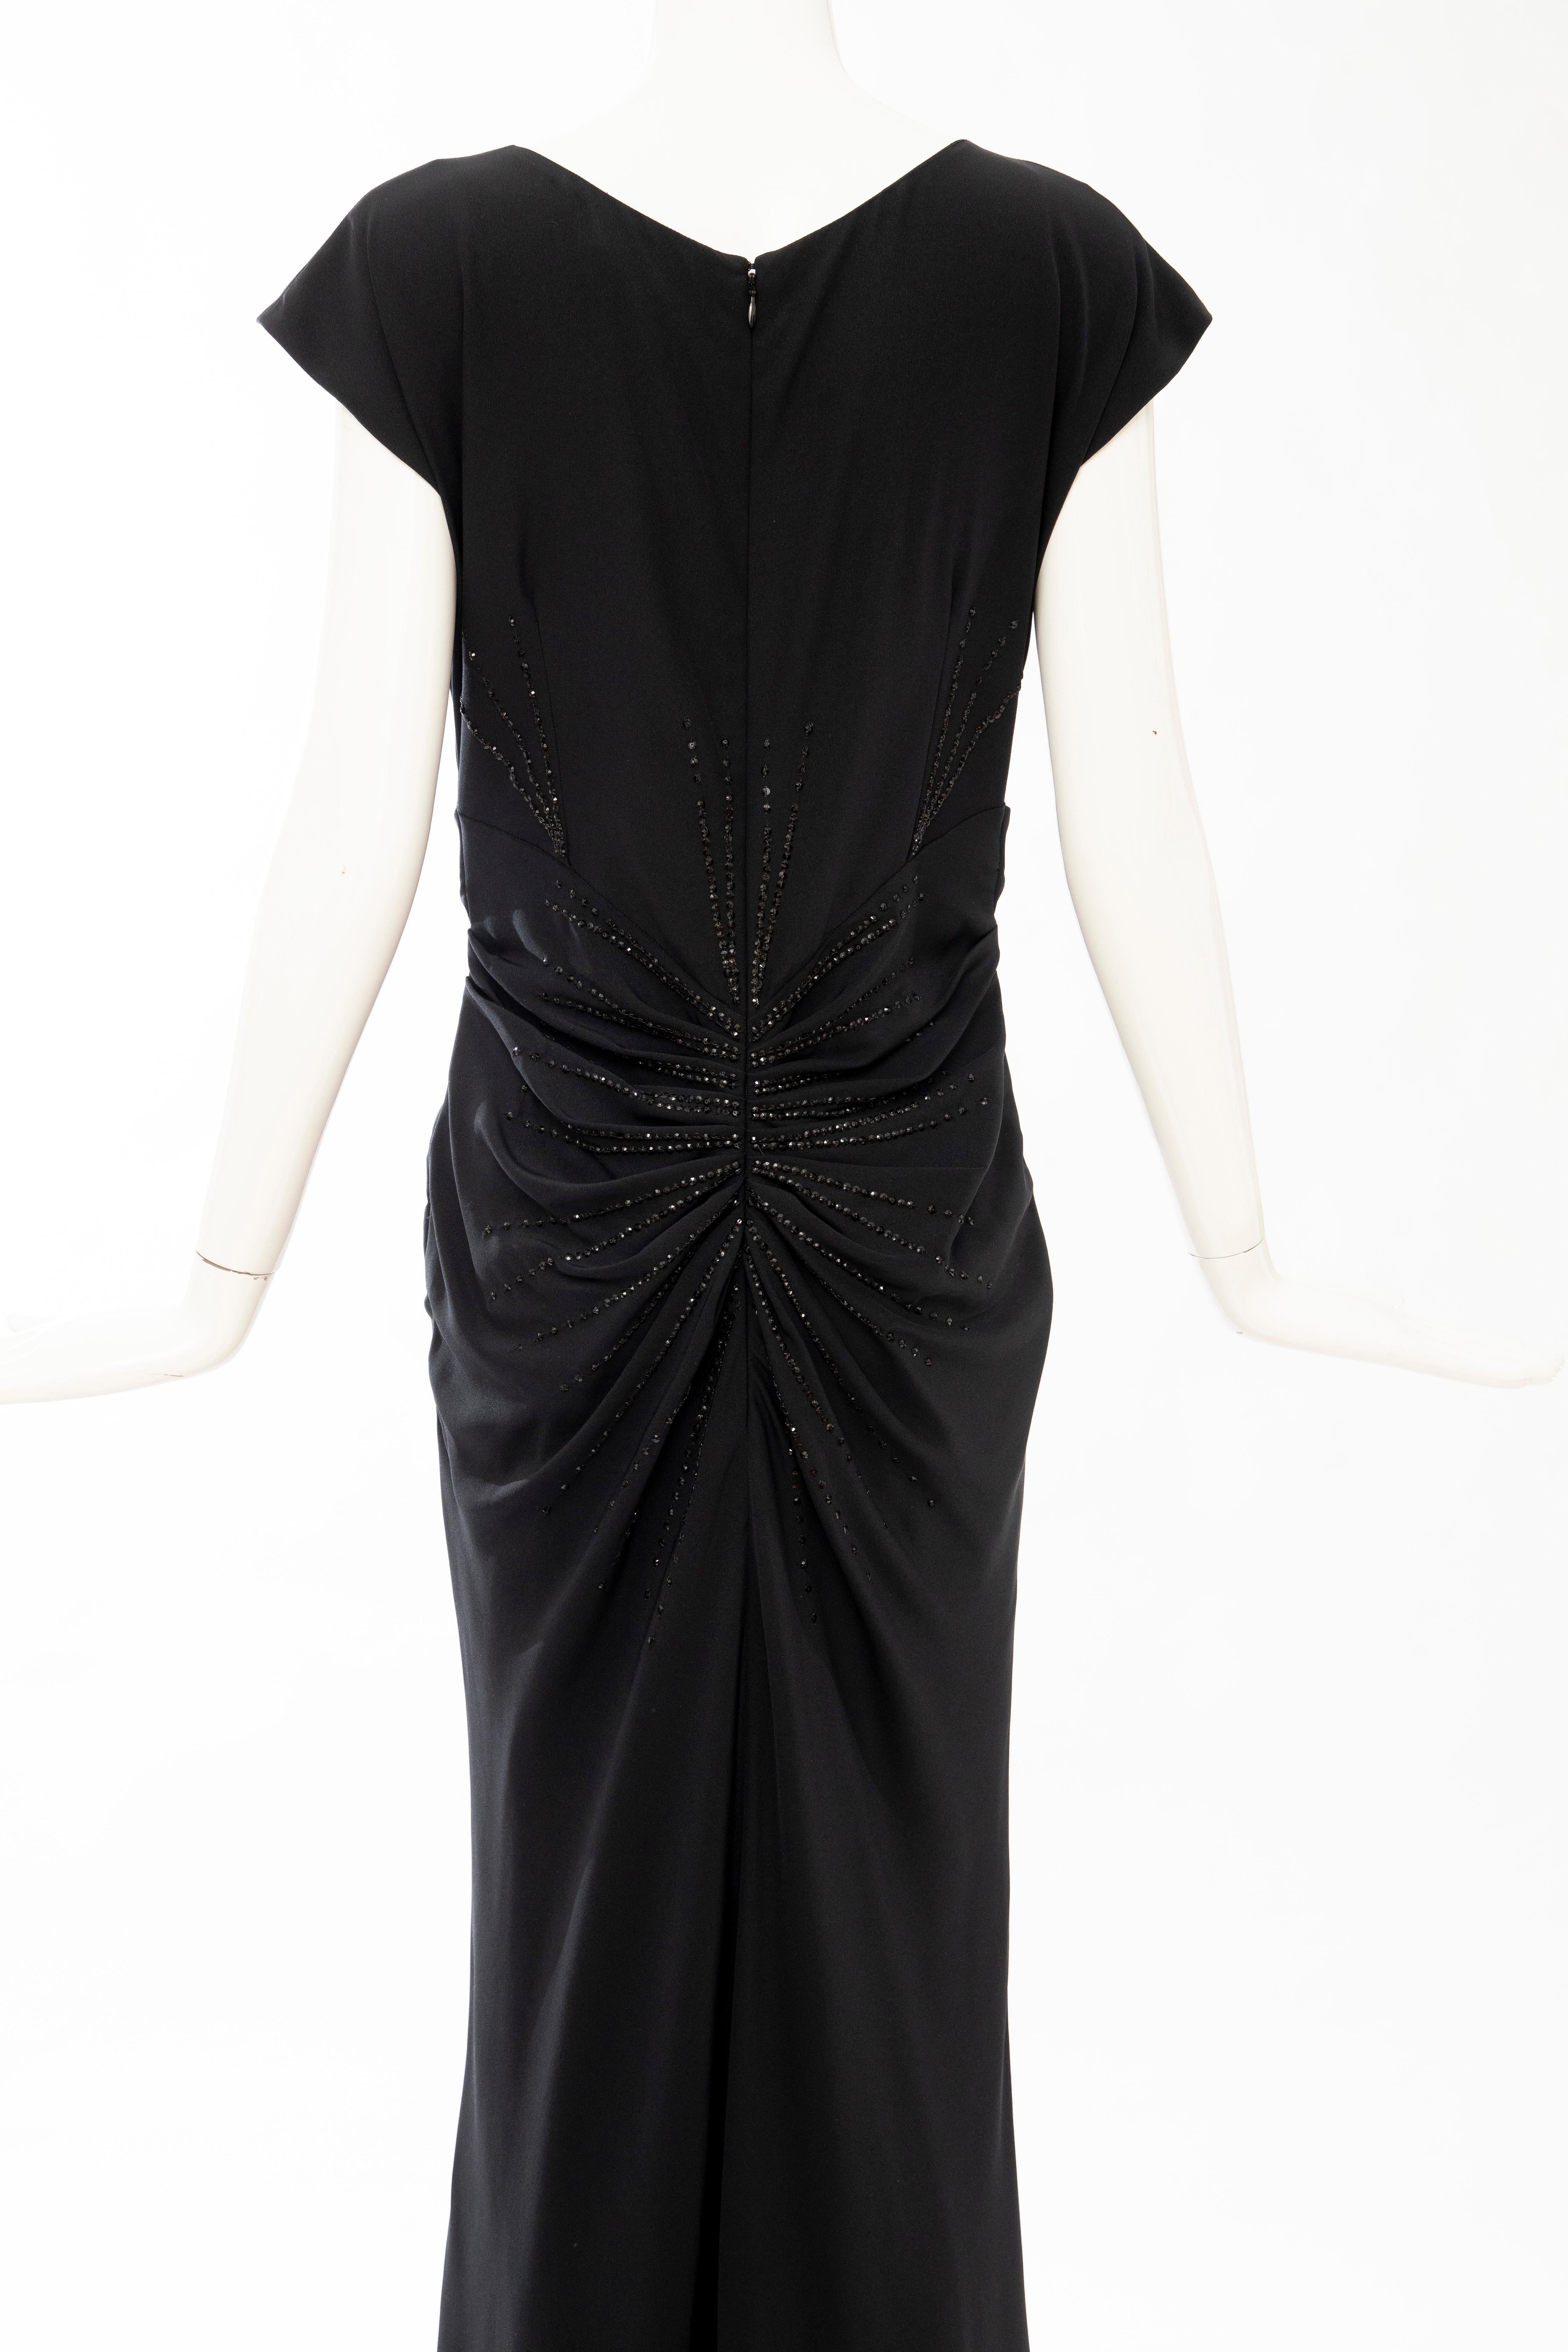 John Galliano for Christian Dior Black Embroidered Evening Dress, Spring 2008 6